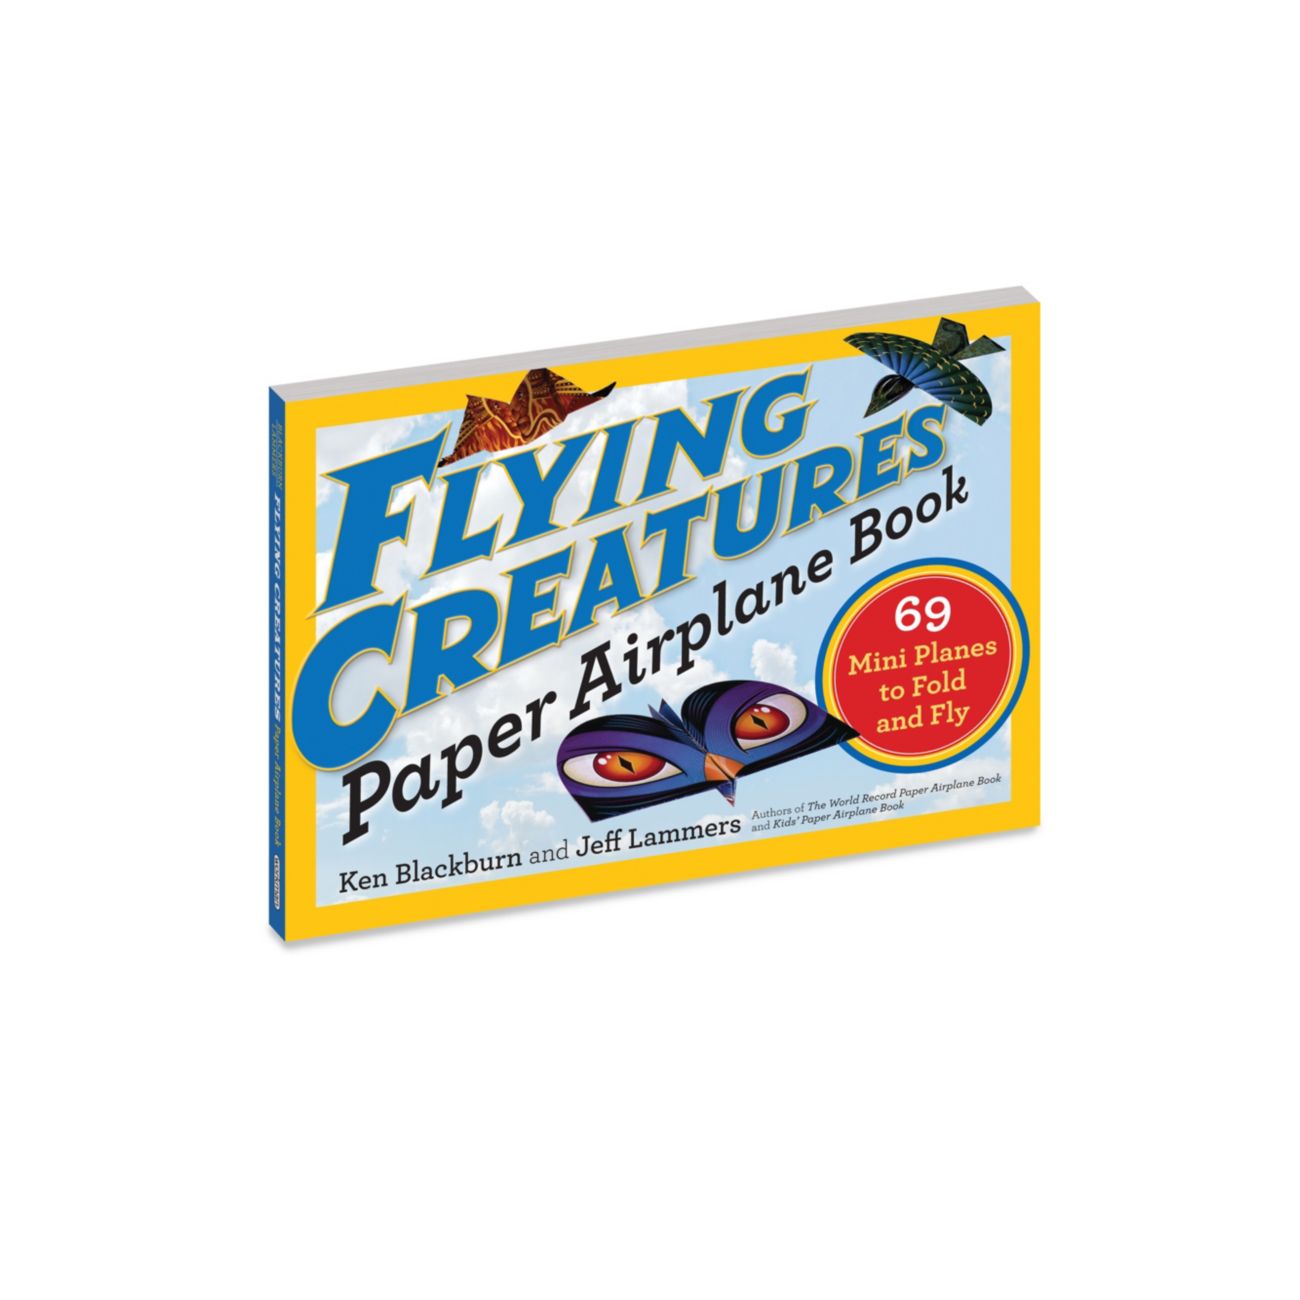 Flying Creatures Paper Airplane Book Workman Publishing